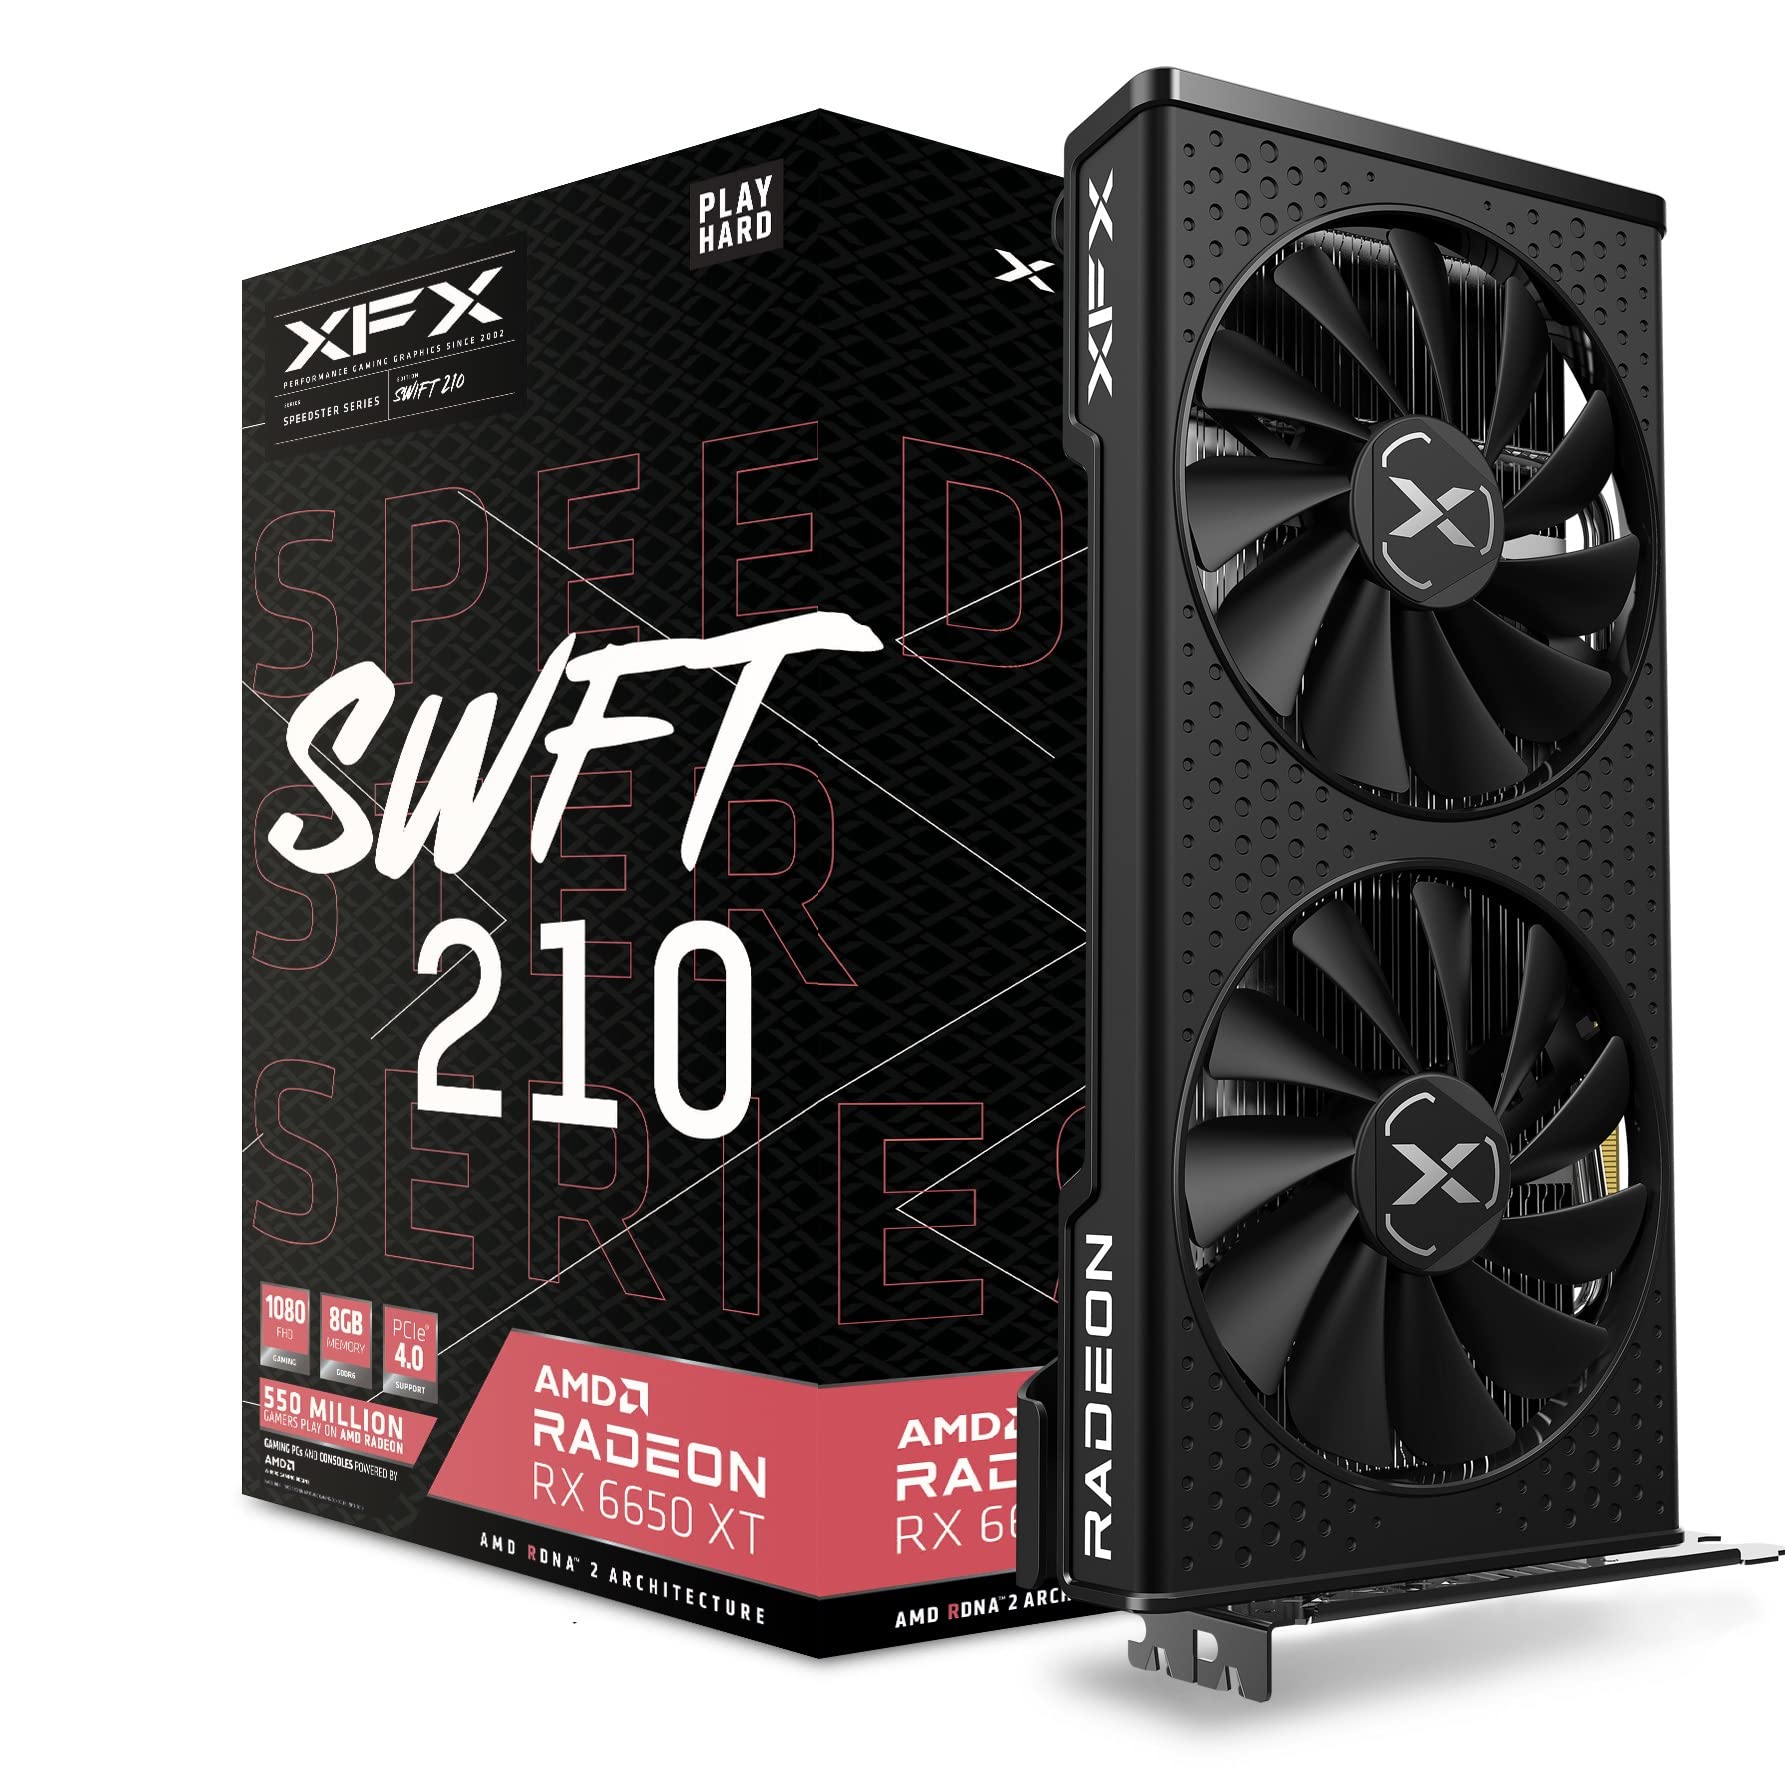 XFX Speedster SWFT210 Radeon RX 6650XT CORE Gaming Graphics Card with 8GB GDDR6 HDMI 3xDP, AMD RDNA 2 RX-665X8DFDY $220